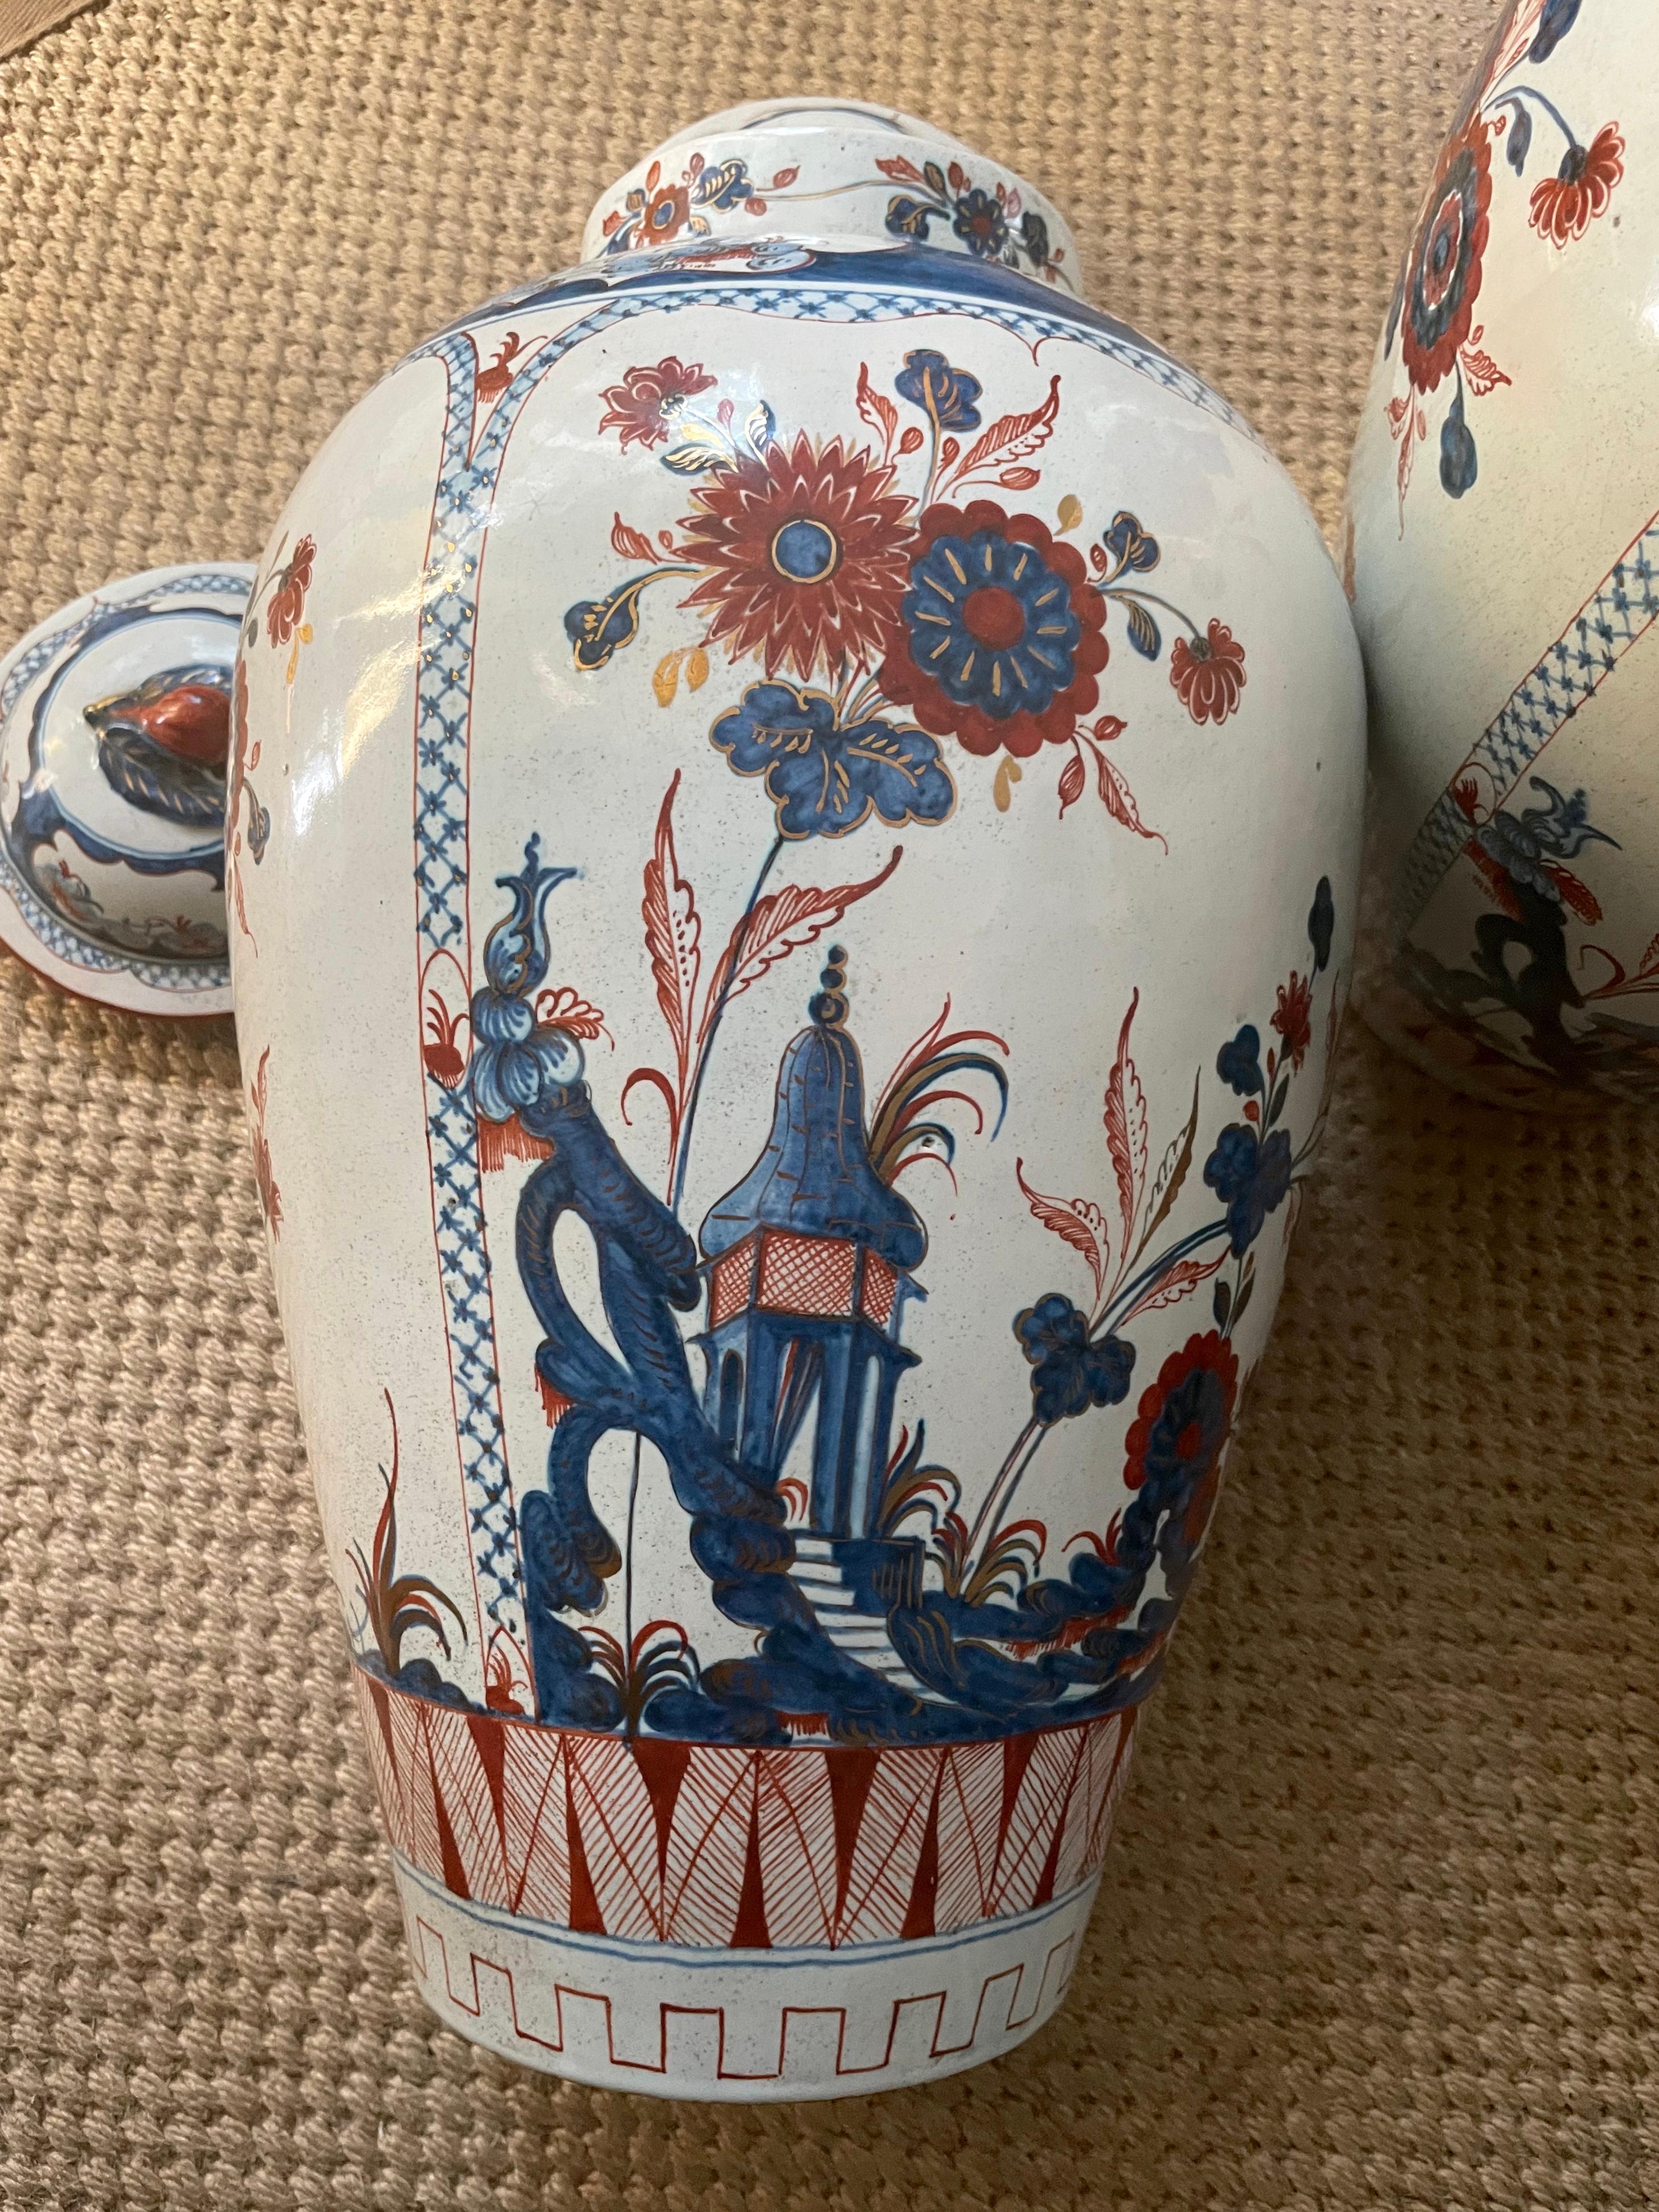 Pair blue and white chinoserie faiance vases. Pair large chinoiserie painted vases / ginger jars in Imari palette of blues, iron red, and gilding on cream ground with pagodas, flowers, and stylized fencing after the Doccia pattern with fruit knopfed